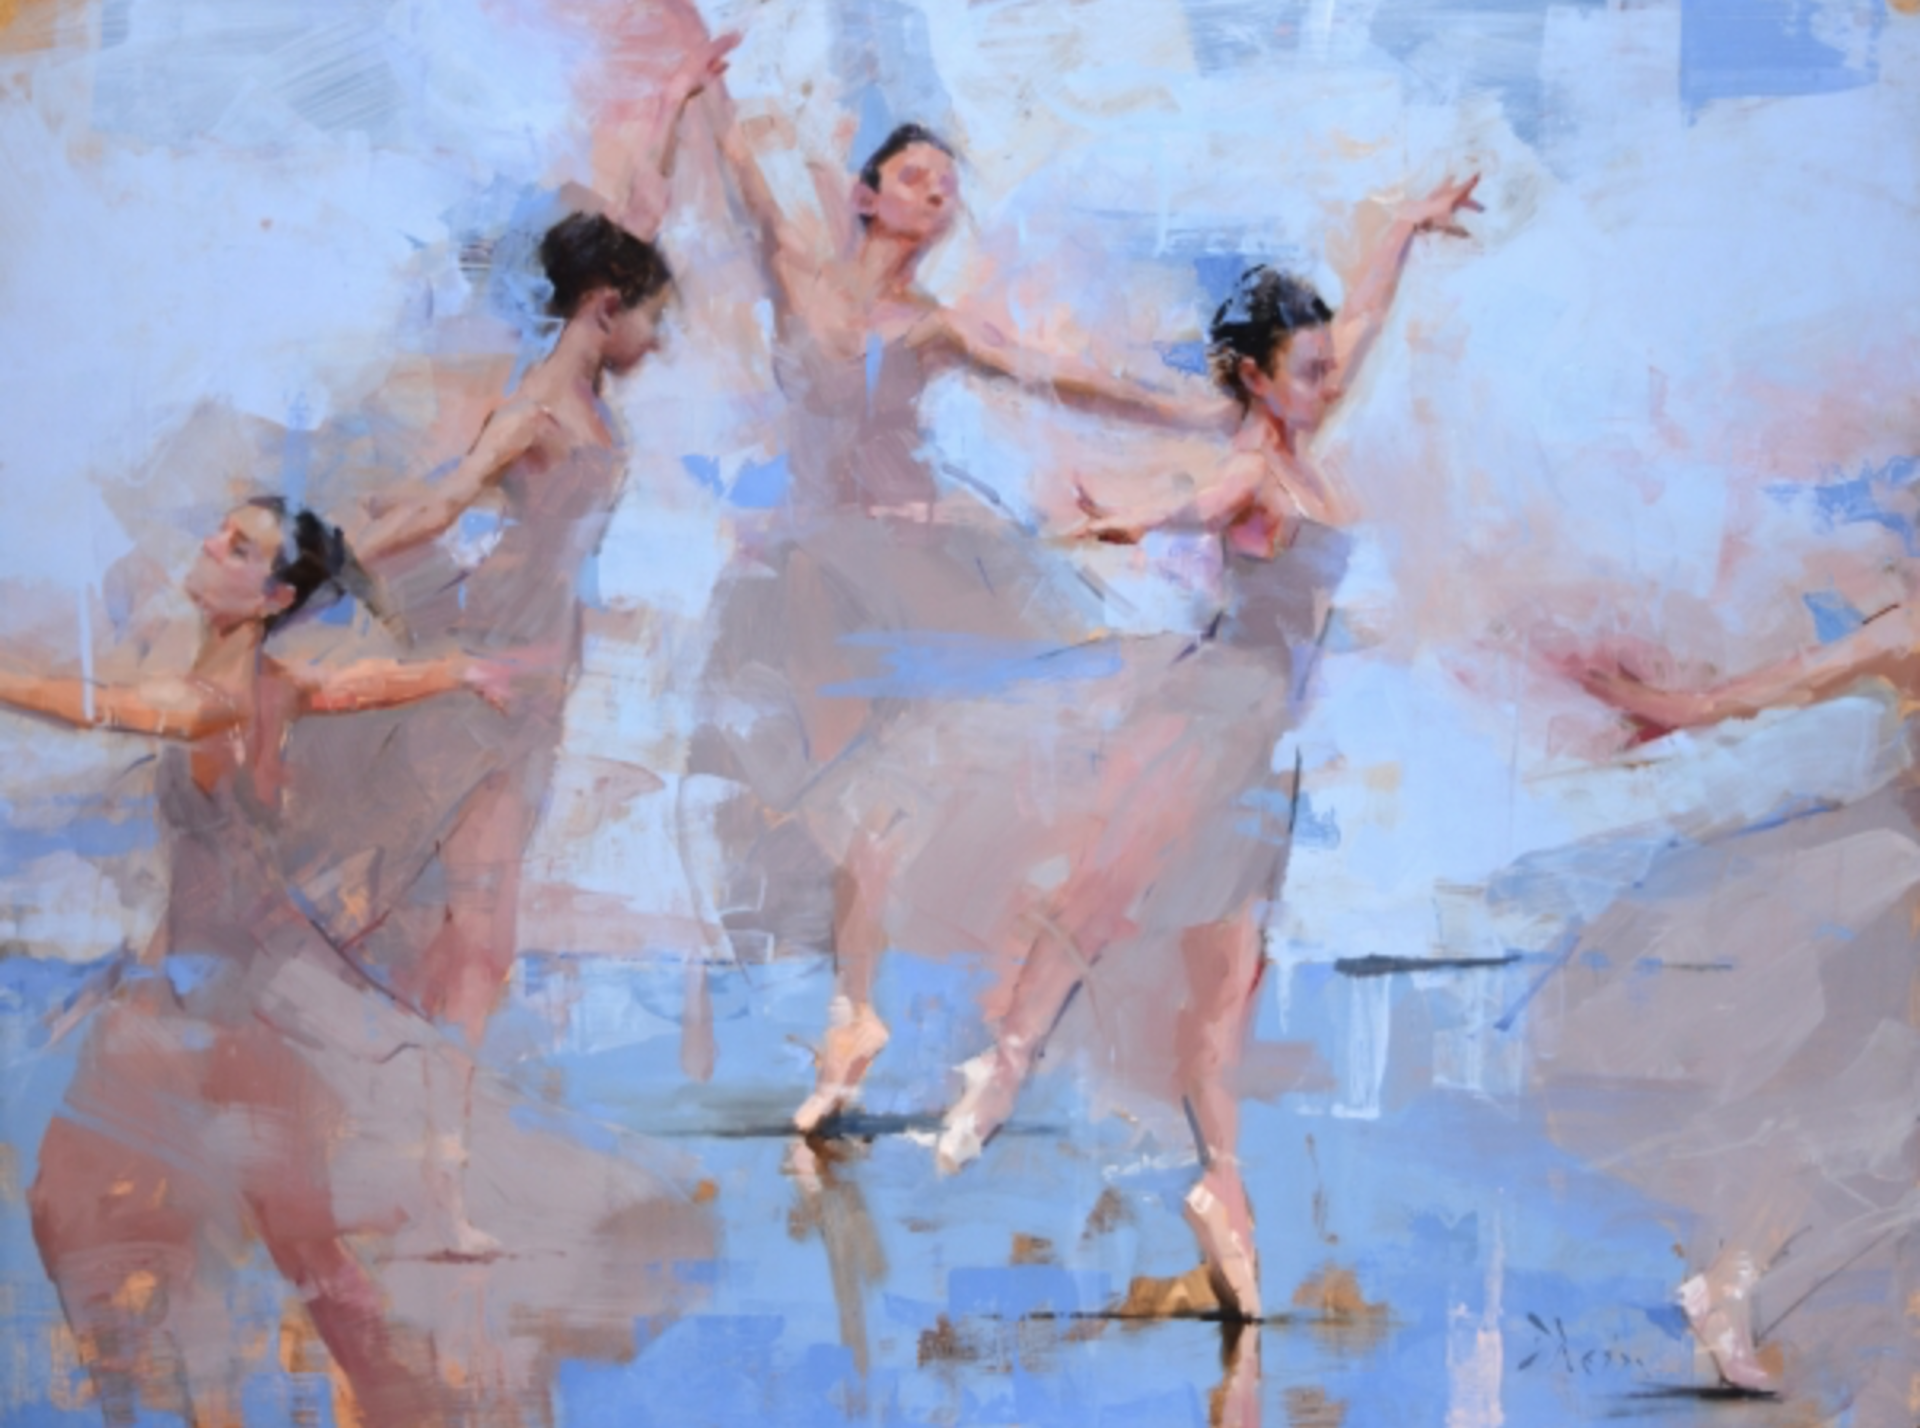 Dancers in Motion by Jacob Dhein